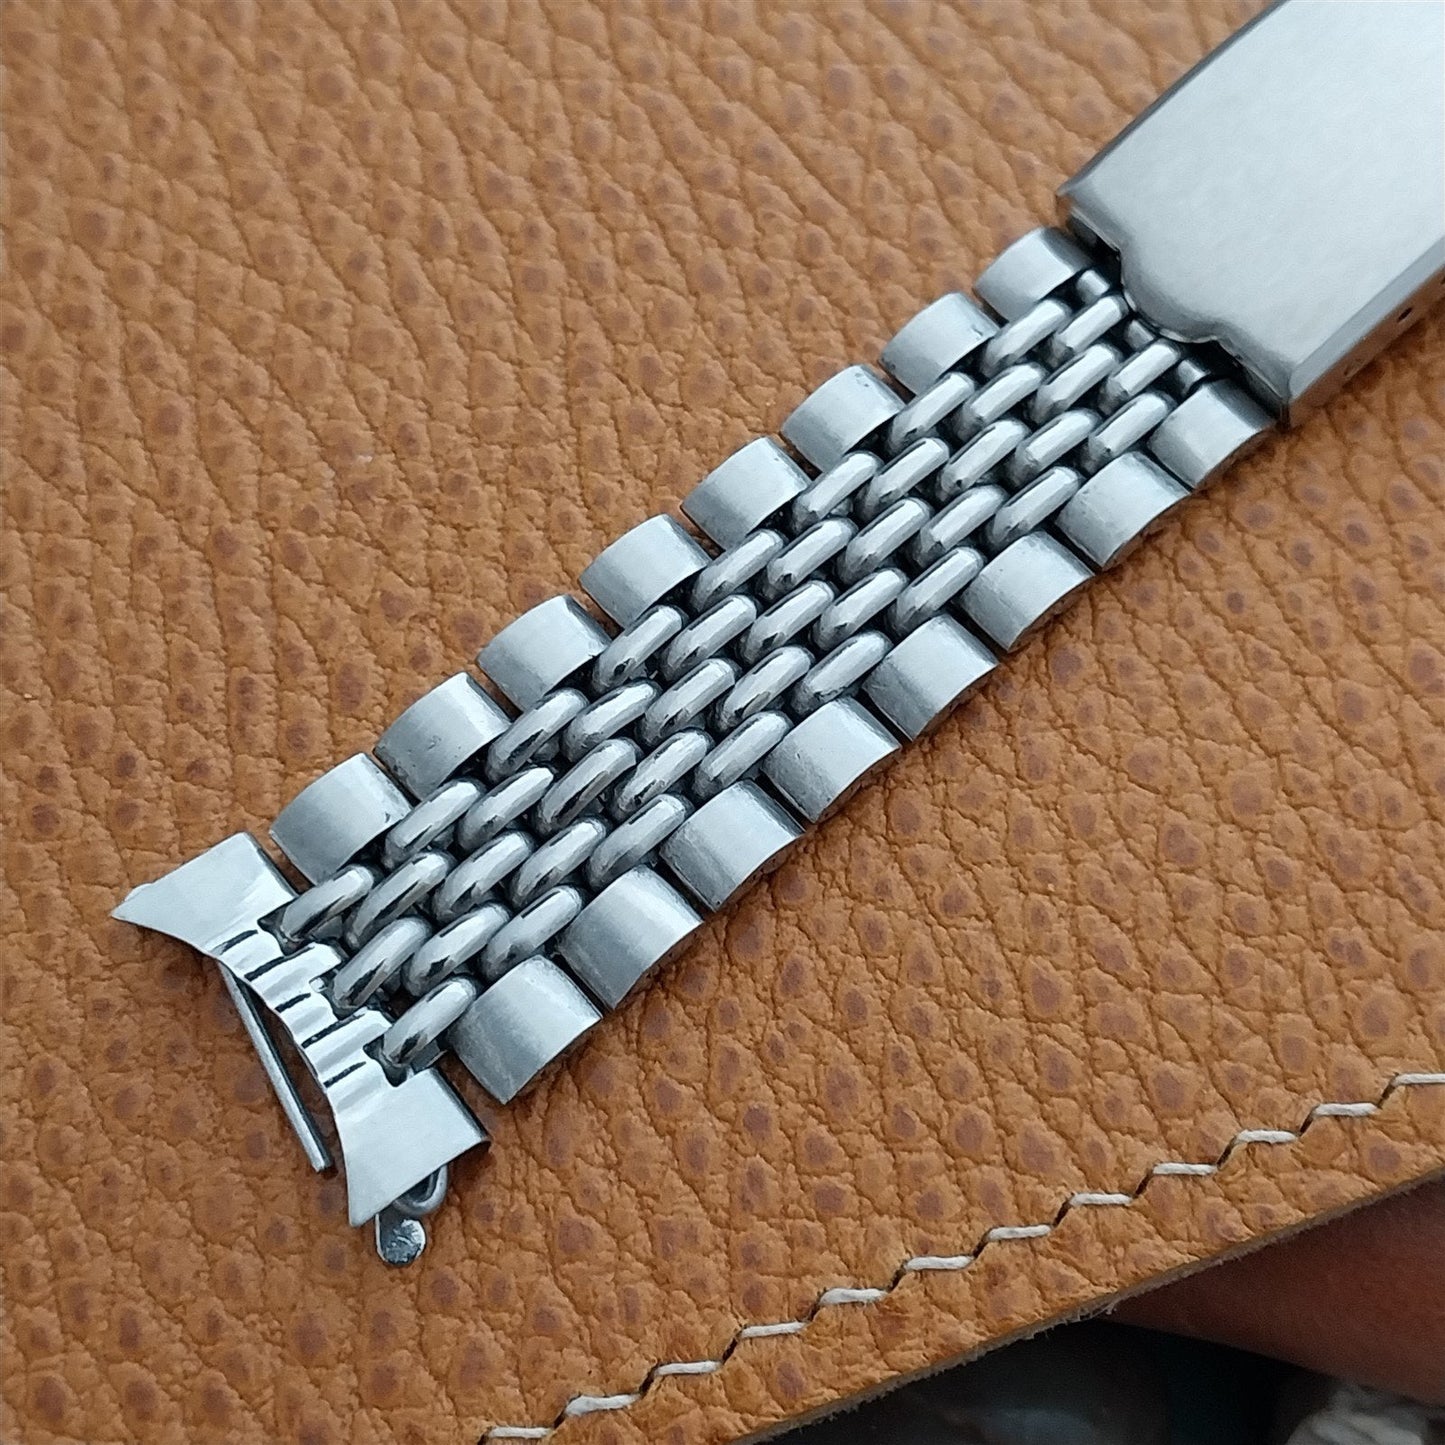 19mm Beads of Rice Stainless Steel Classic Unused 1960s-1970s Vintage Watch Band